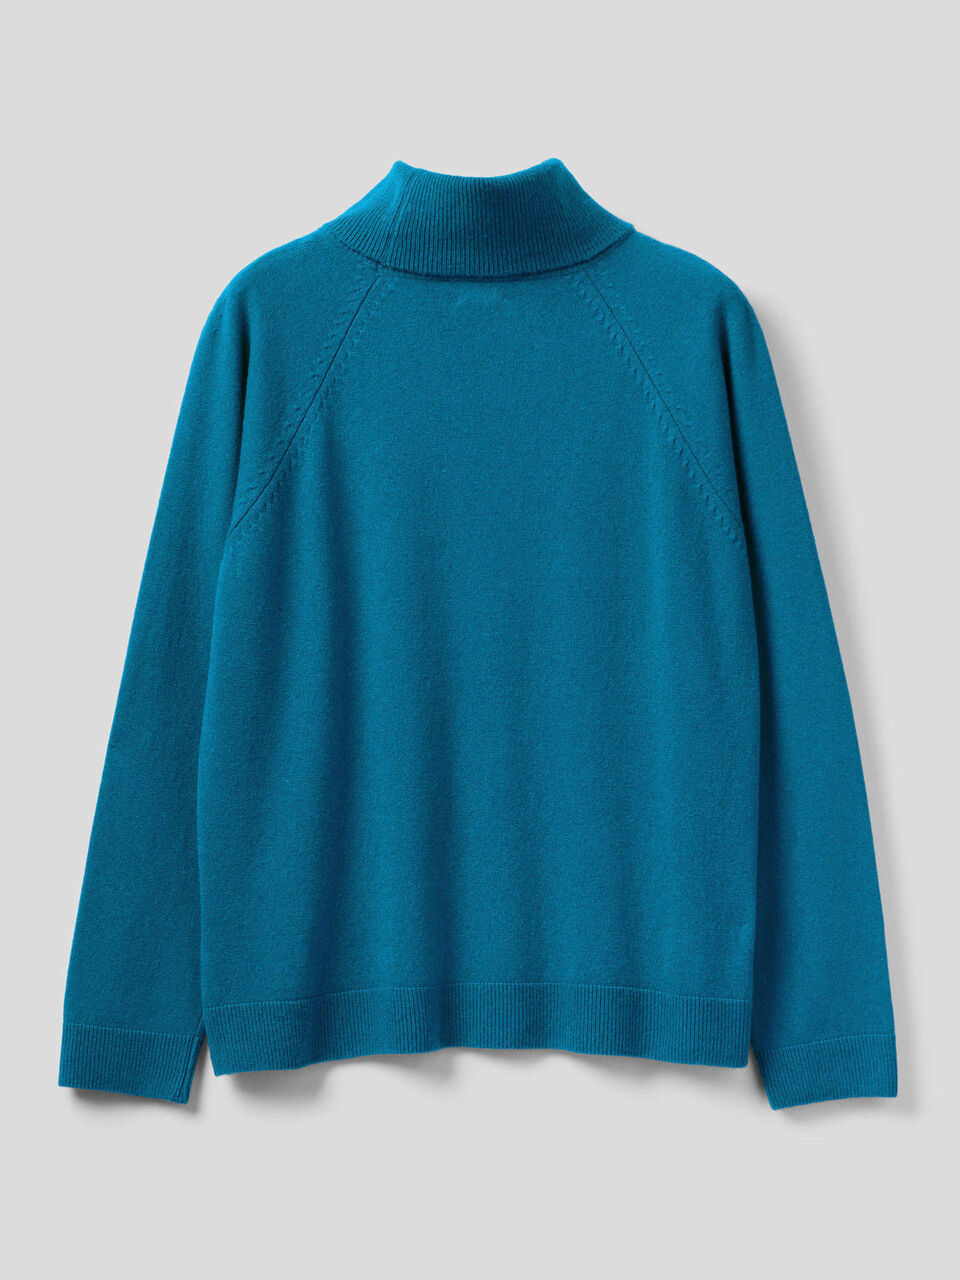 Teal turtleneck sweater in cashmere and wool blend